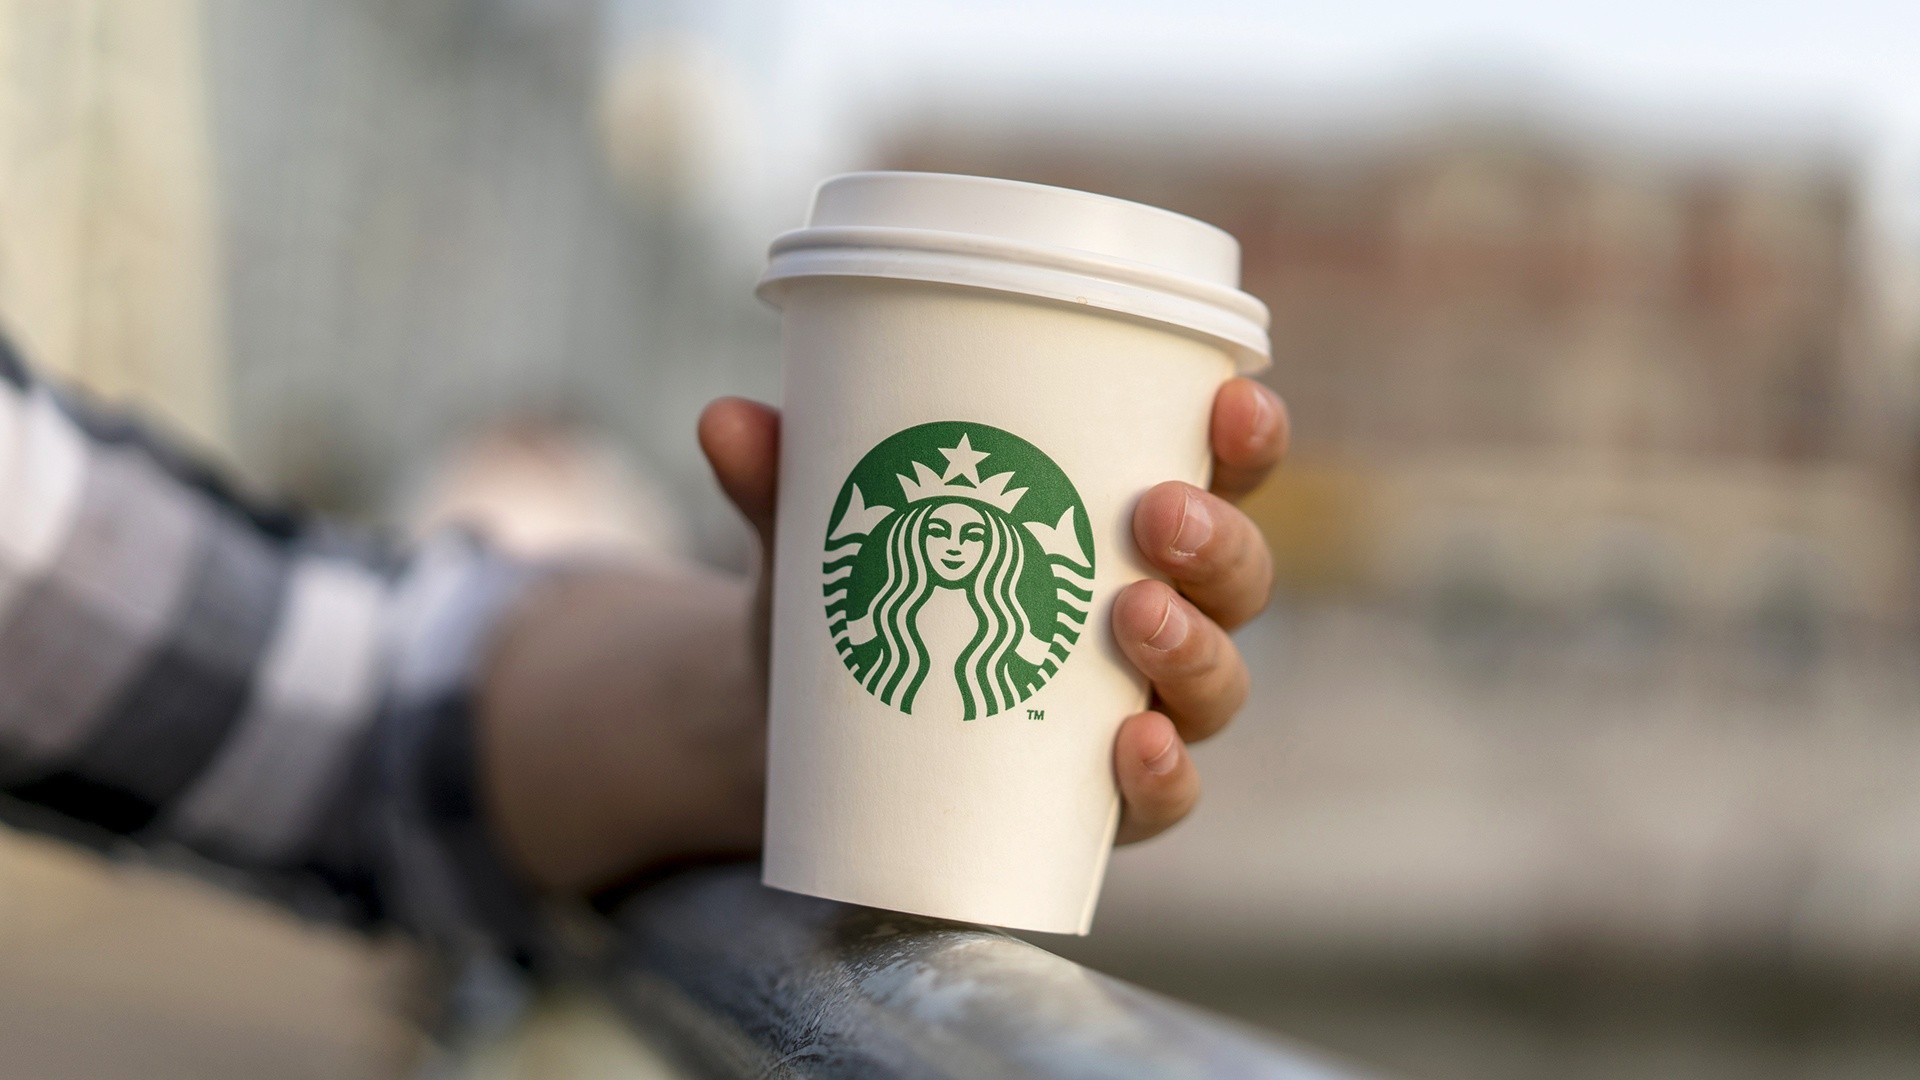 https://media-cldnry.s-nbcnews.com/image/upload/mpx/2704722219/2022_03/1647431385990_tdy_news_7a_starbucks_cups_220316_1920x1080-1a4gda.jpg